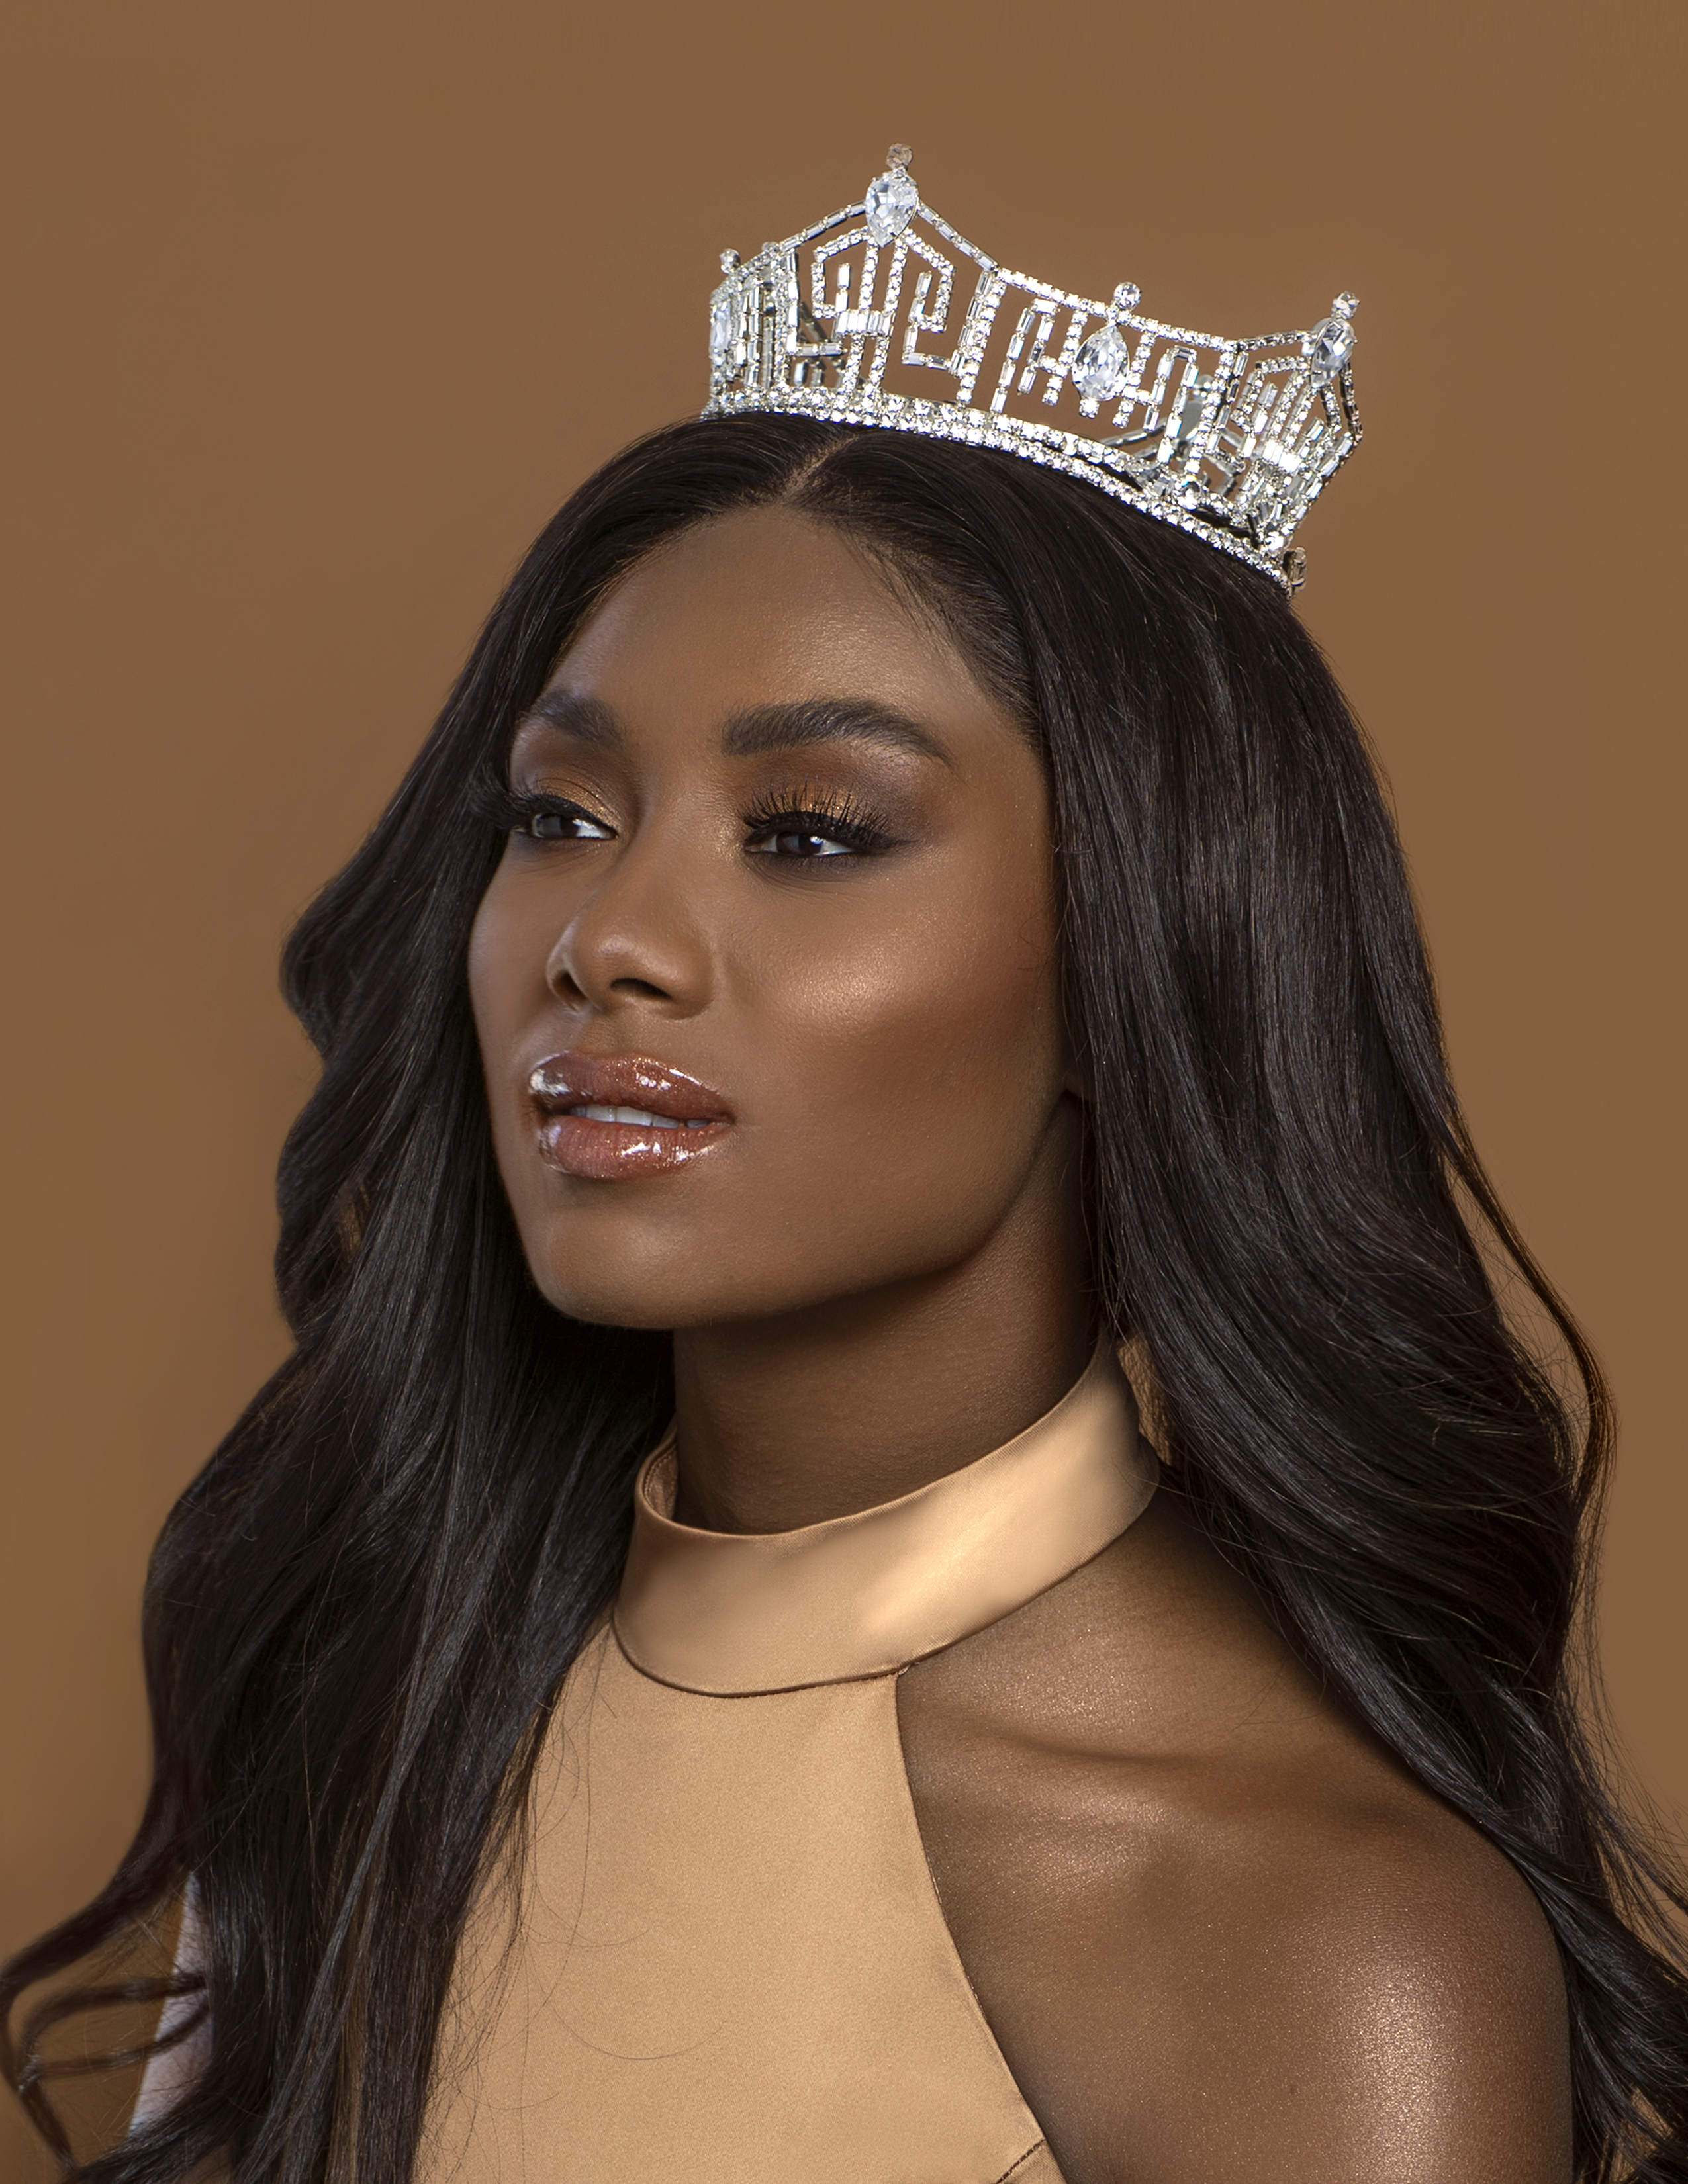 ‘Magic Unfiltered’: We Sat Down With Miss America 2019, Nia Franklin